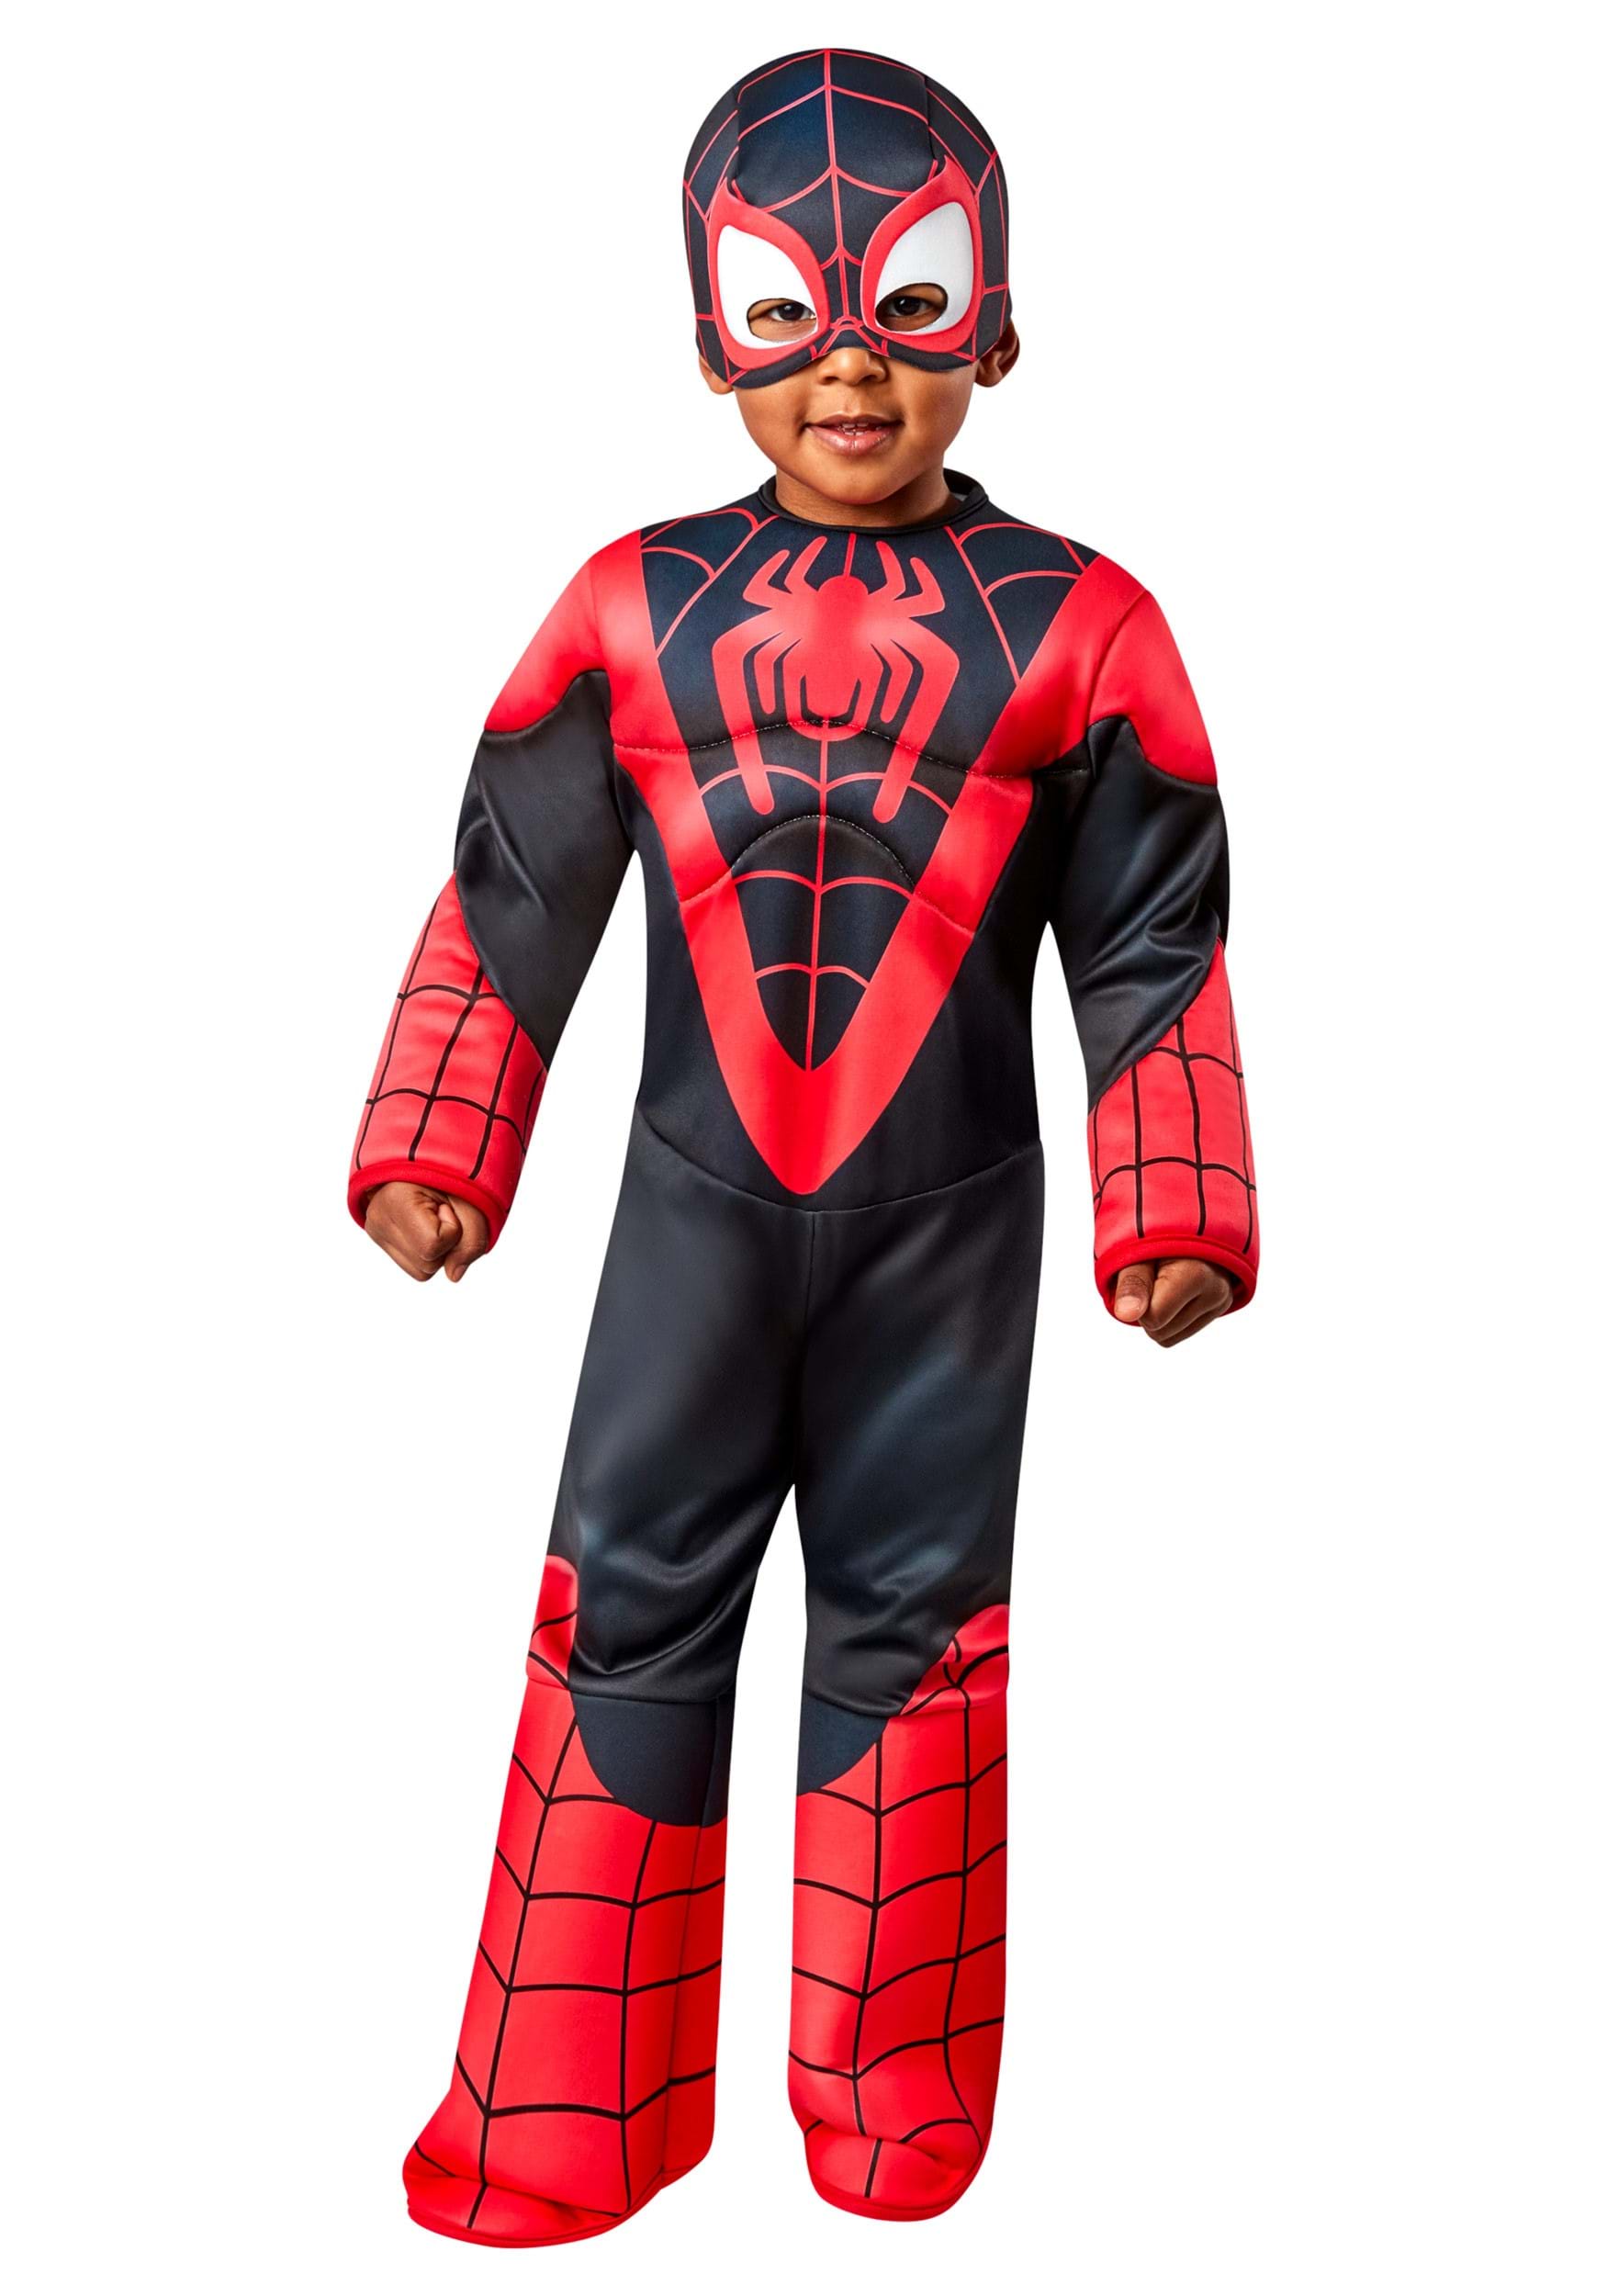 Image of Marvel Deluxe Toddler Miles Morales Spider-Man Costume ID RU702741-4T